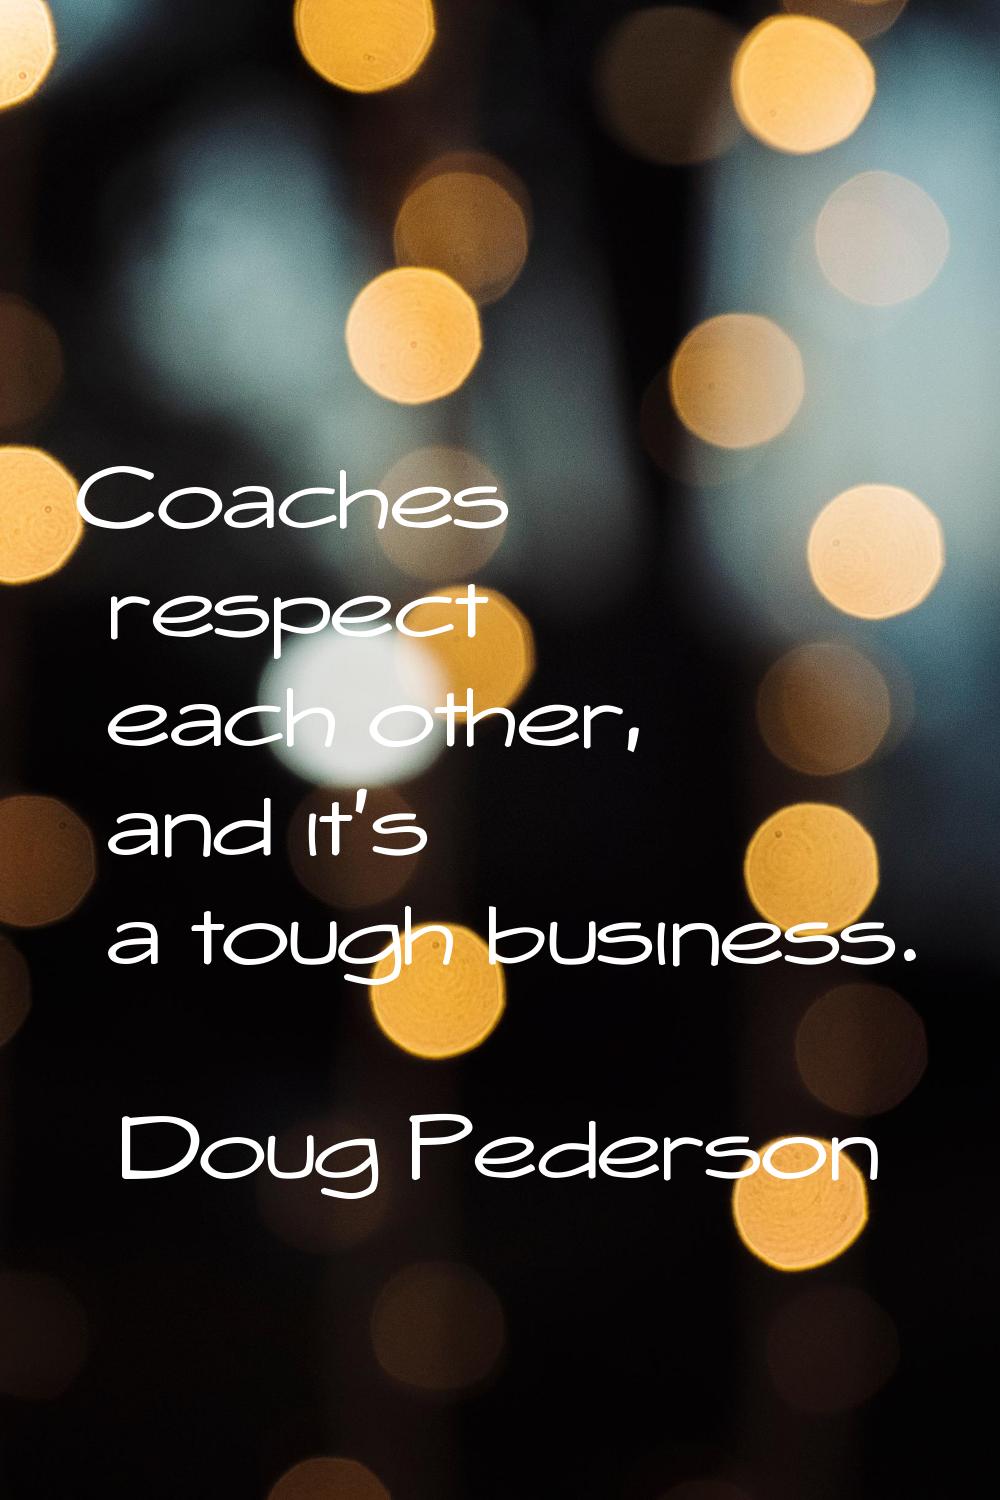 Coaches respect each other, and it's a tough business.